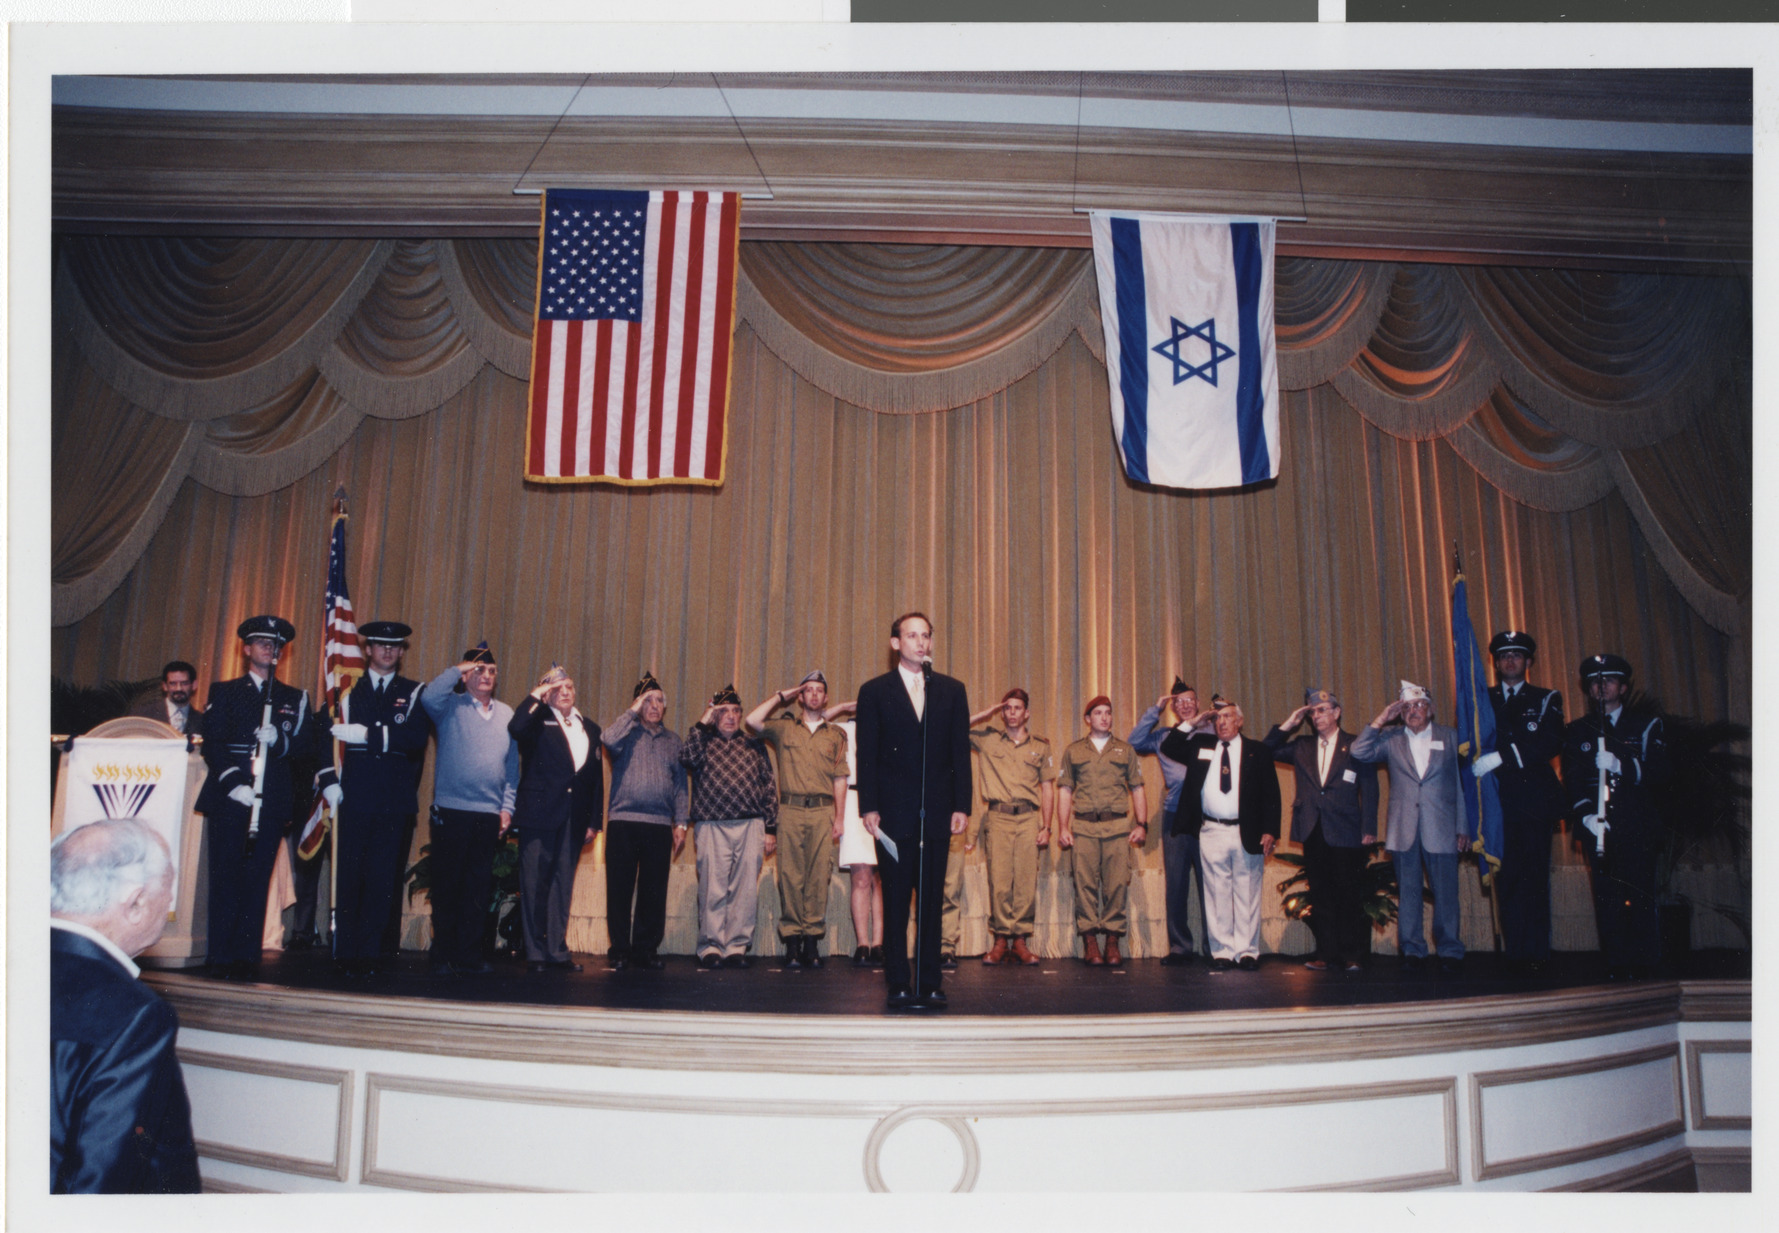 Photograph of event hosted by the Jewish Federation of Las Vegas, 2000s